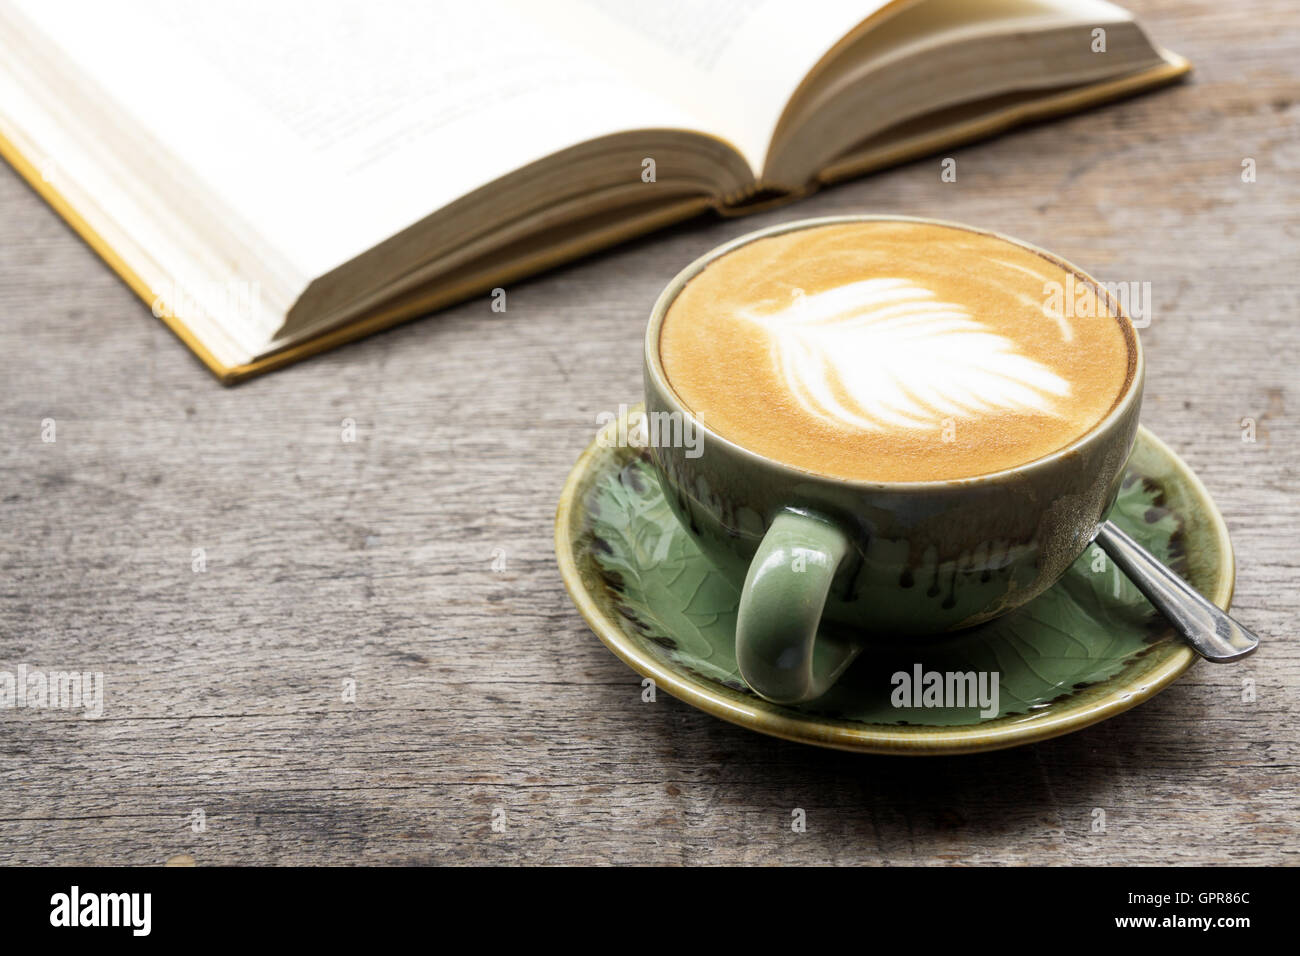 Leisure reading book with a cup of coffee latte Stock Photo